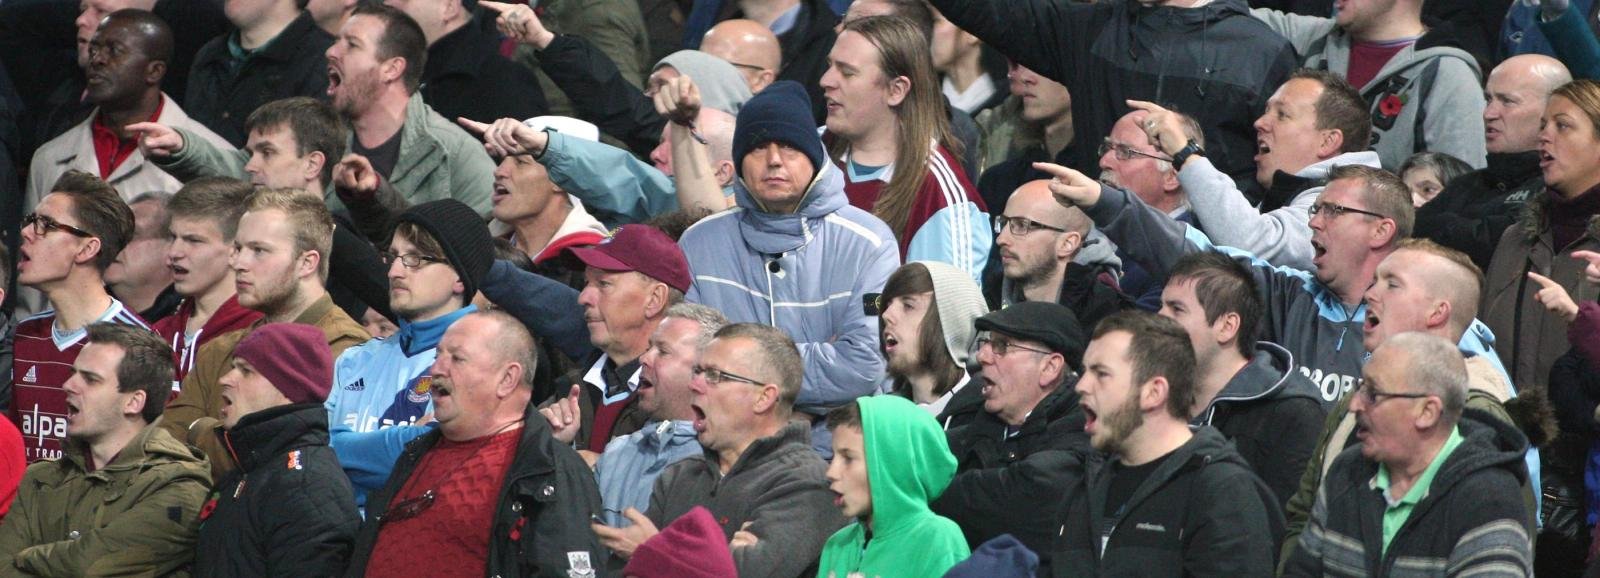 West Ham not reflected on well in ‘Price of Football’ survey